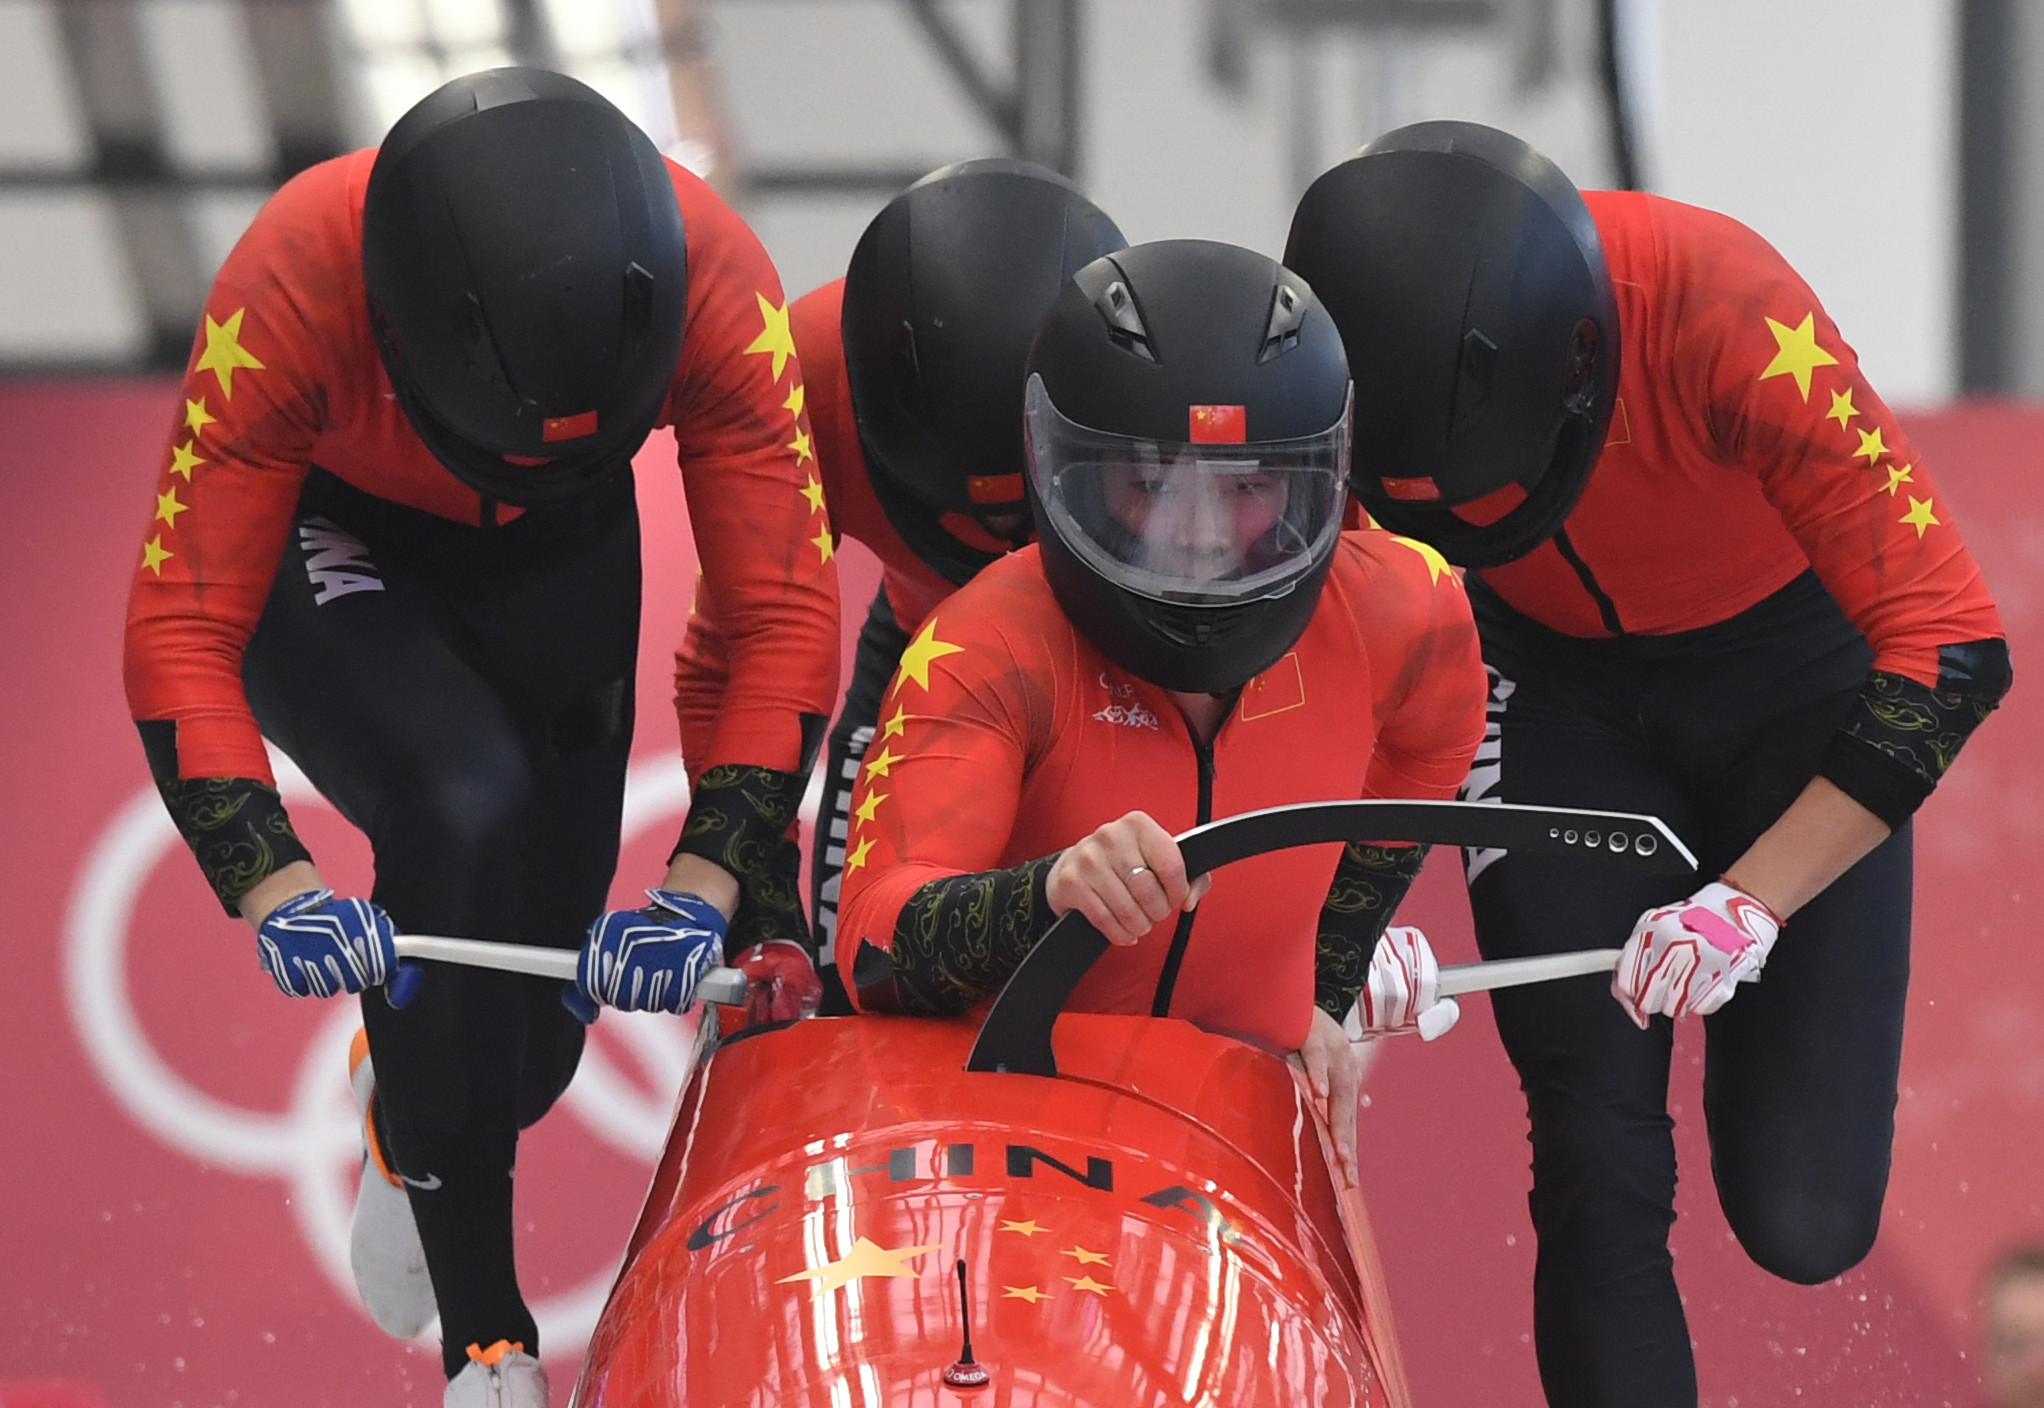 China is looking to improve its bobsleigh pedigree ©Getty Images